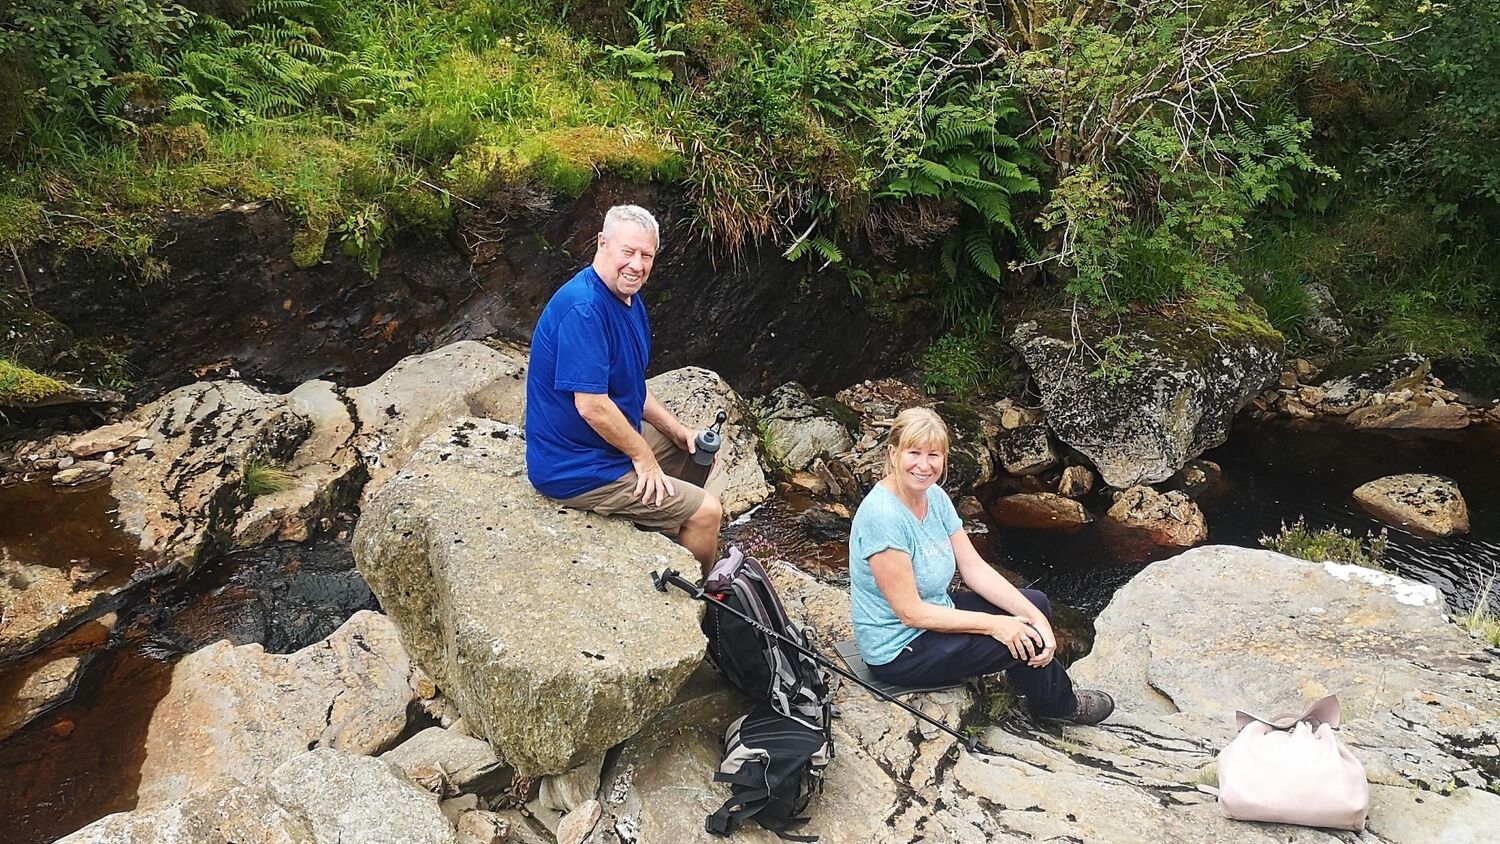 A man and a woman sit on some large boulders at the edge of a burn, running down over rocks. Both turn towards the camera and smile. A large rucksack and a walking pole lies on the rock between them, with a smaller rucksack at the woman’s feet. The man is holding a water bottle.